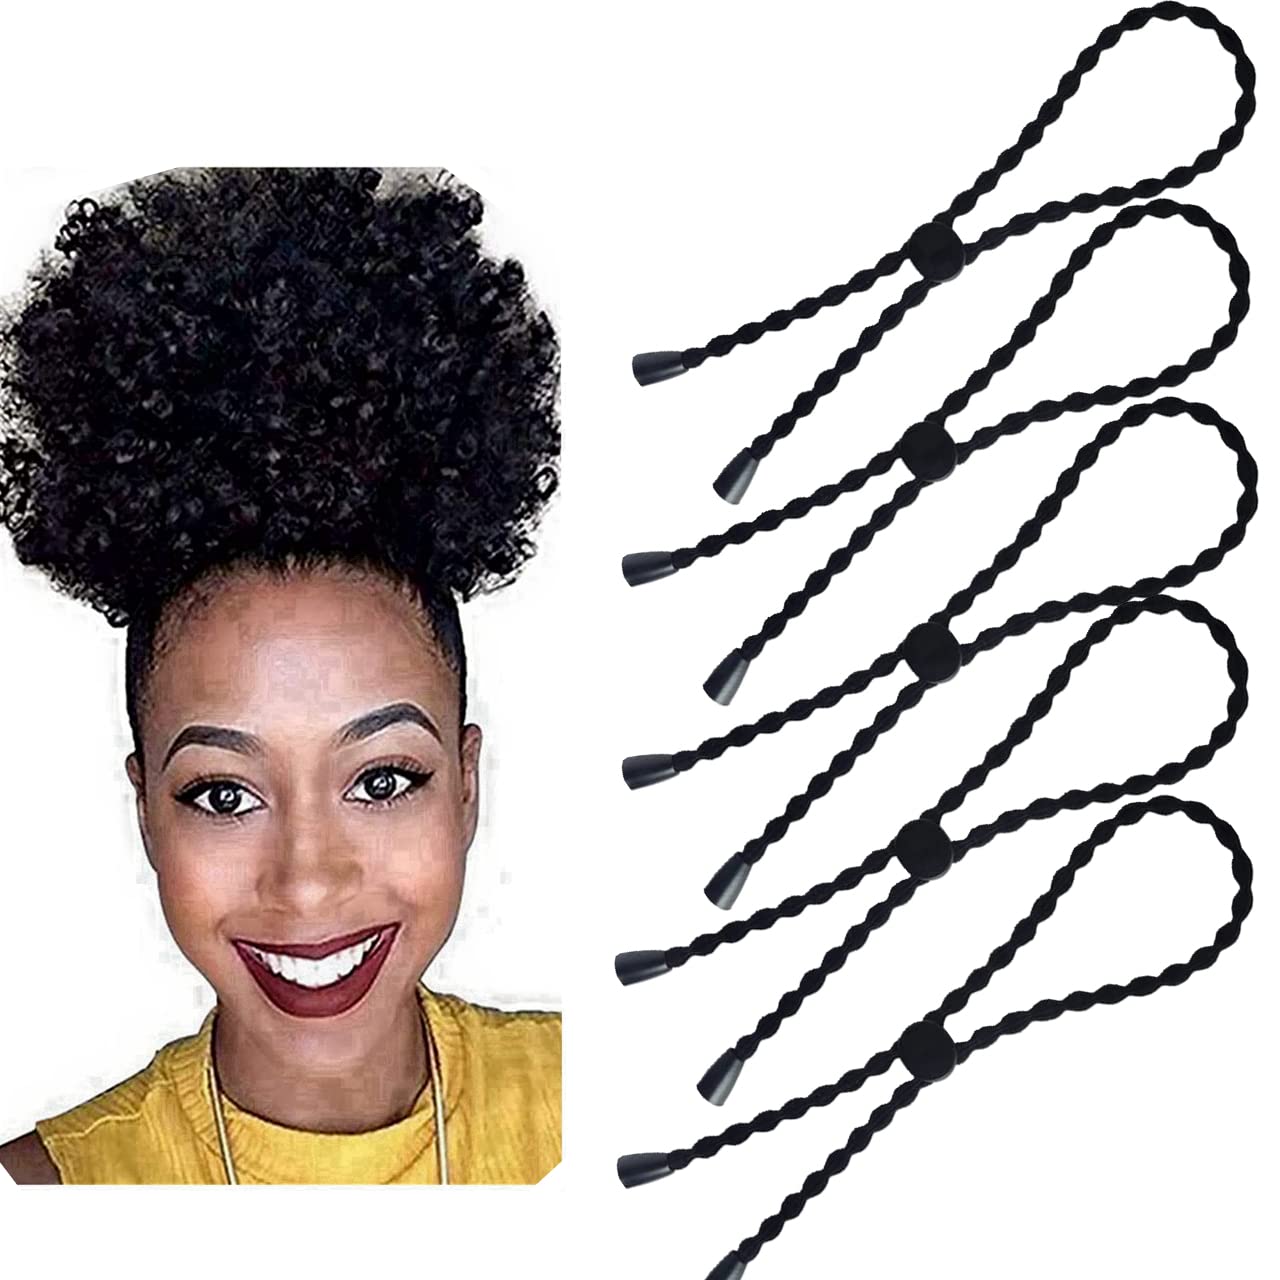 5PCS Afro Puff Ponytail Ties Adjustable Hair Holder Length